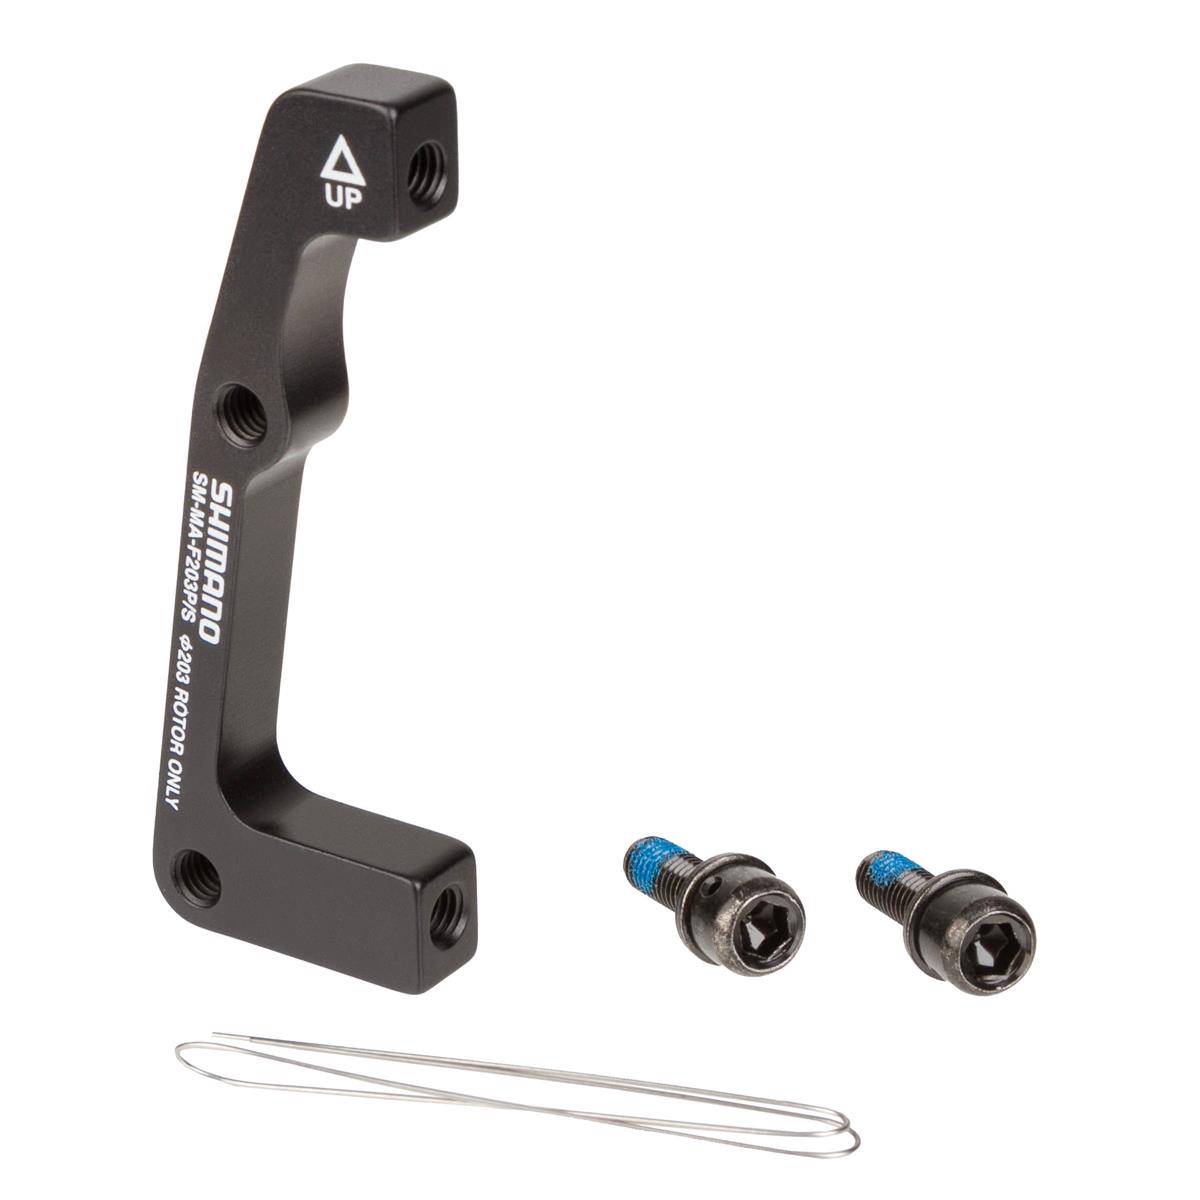 Shimano Adaptateur  Avant, for IS-Brake/PM-Fork, for 203 mm